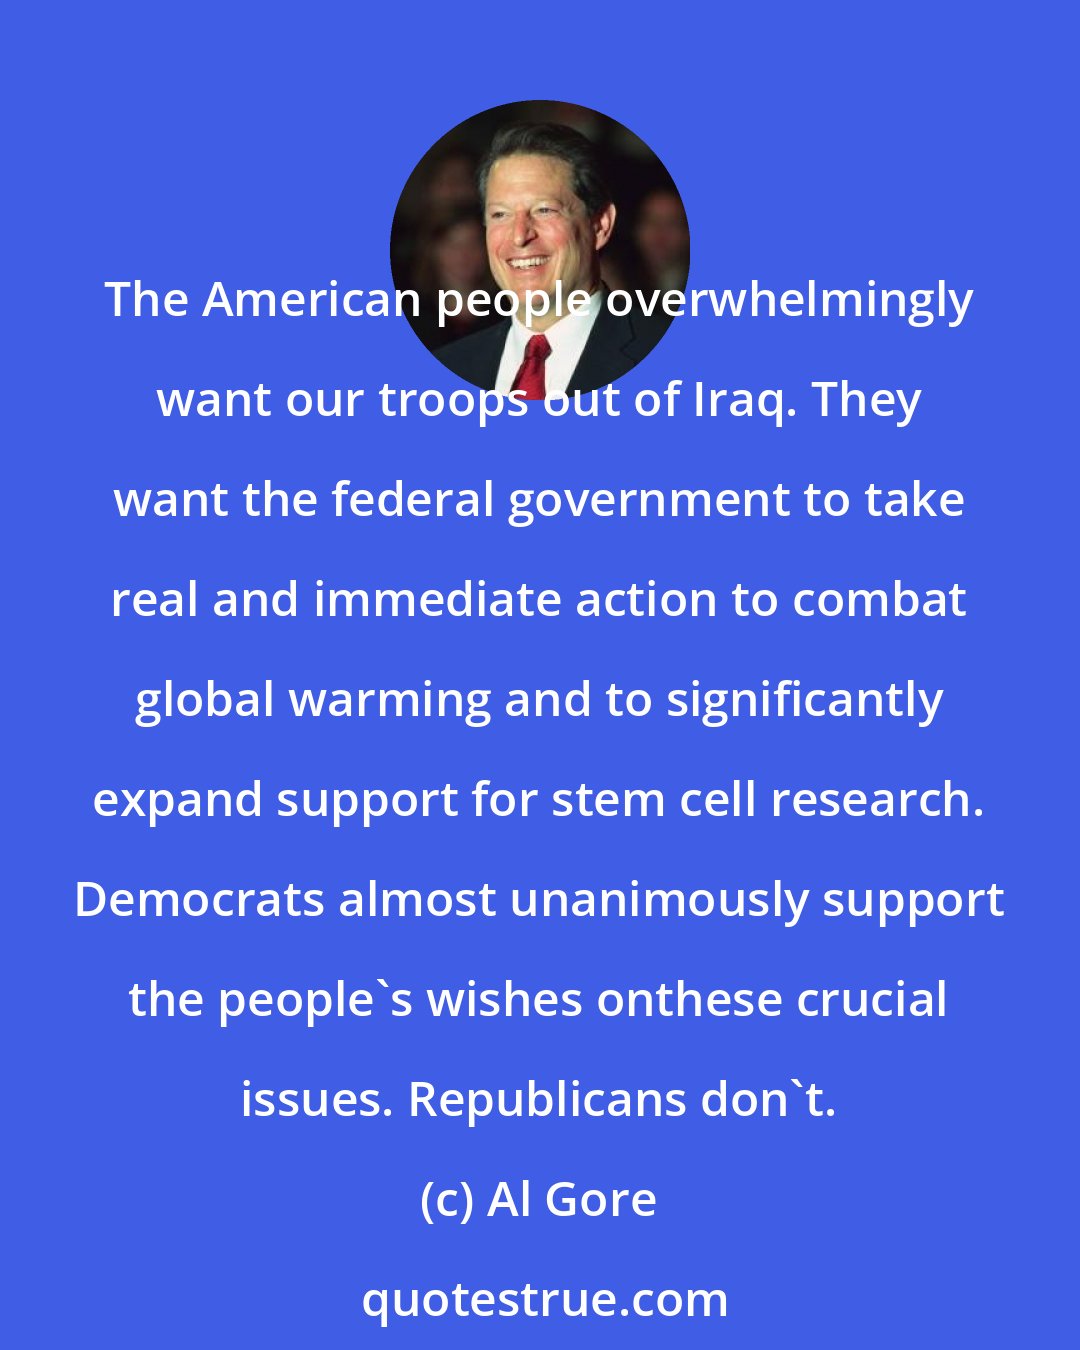 Al Gore: The American people overwhelmingly want our troops out of Iraq. They want the federal government to take real and immediate action to combat global warming and to significantly expand support for stem cell research. Democrats almost unanimously support the people's wishes onthese crucial issues. Republicans don't.